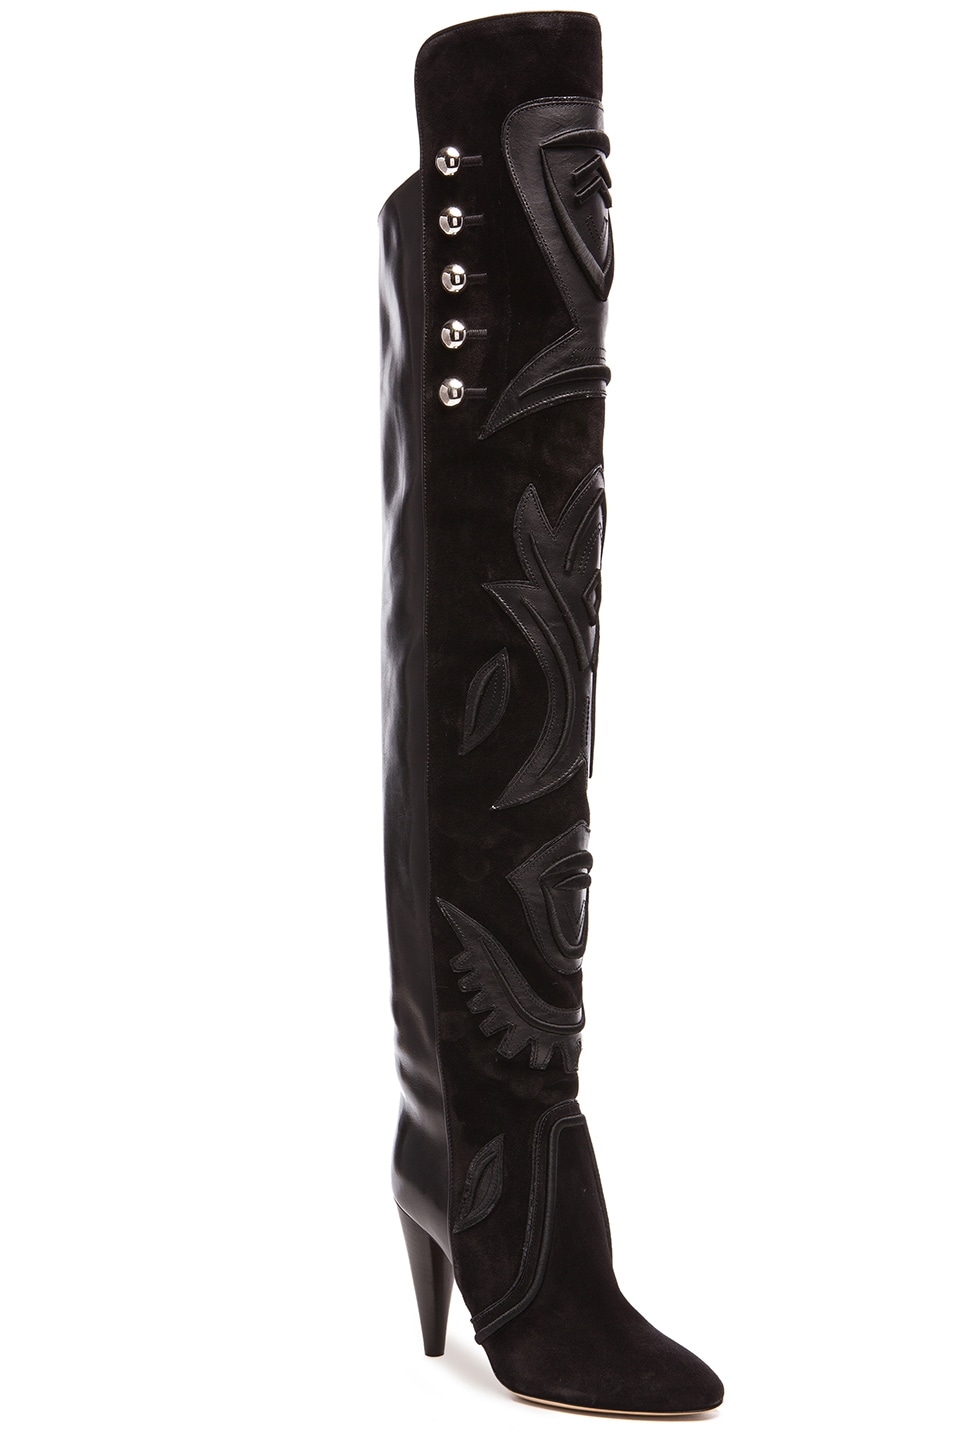 Isabel Marant Becky Thigh High Farrah Leather Boots in Black | FWRD